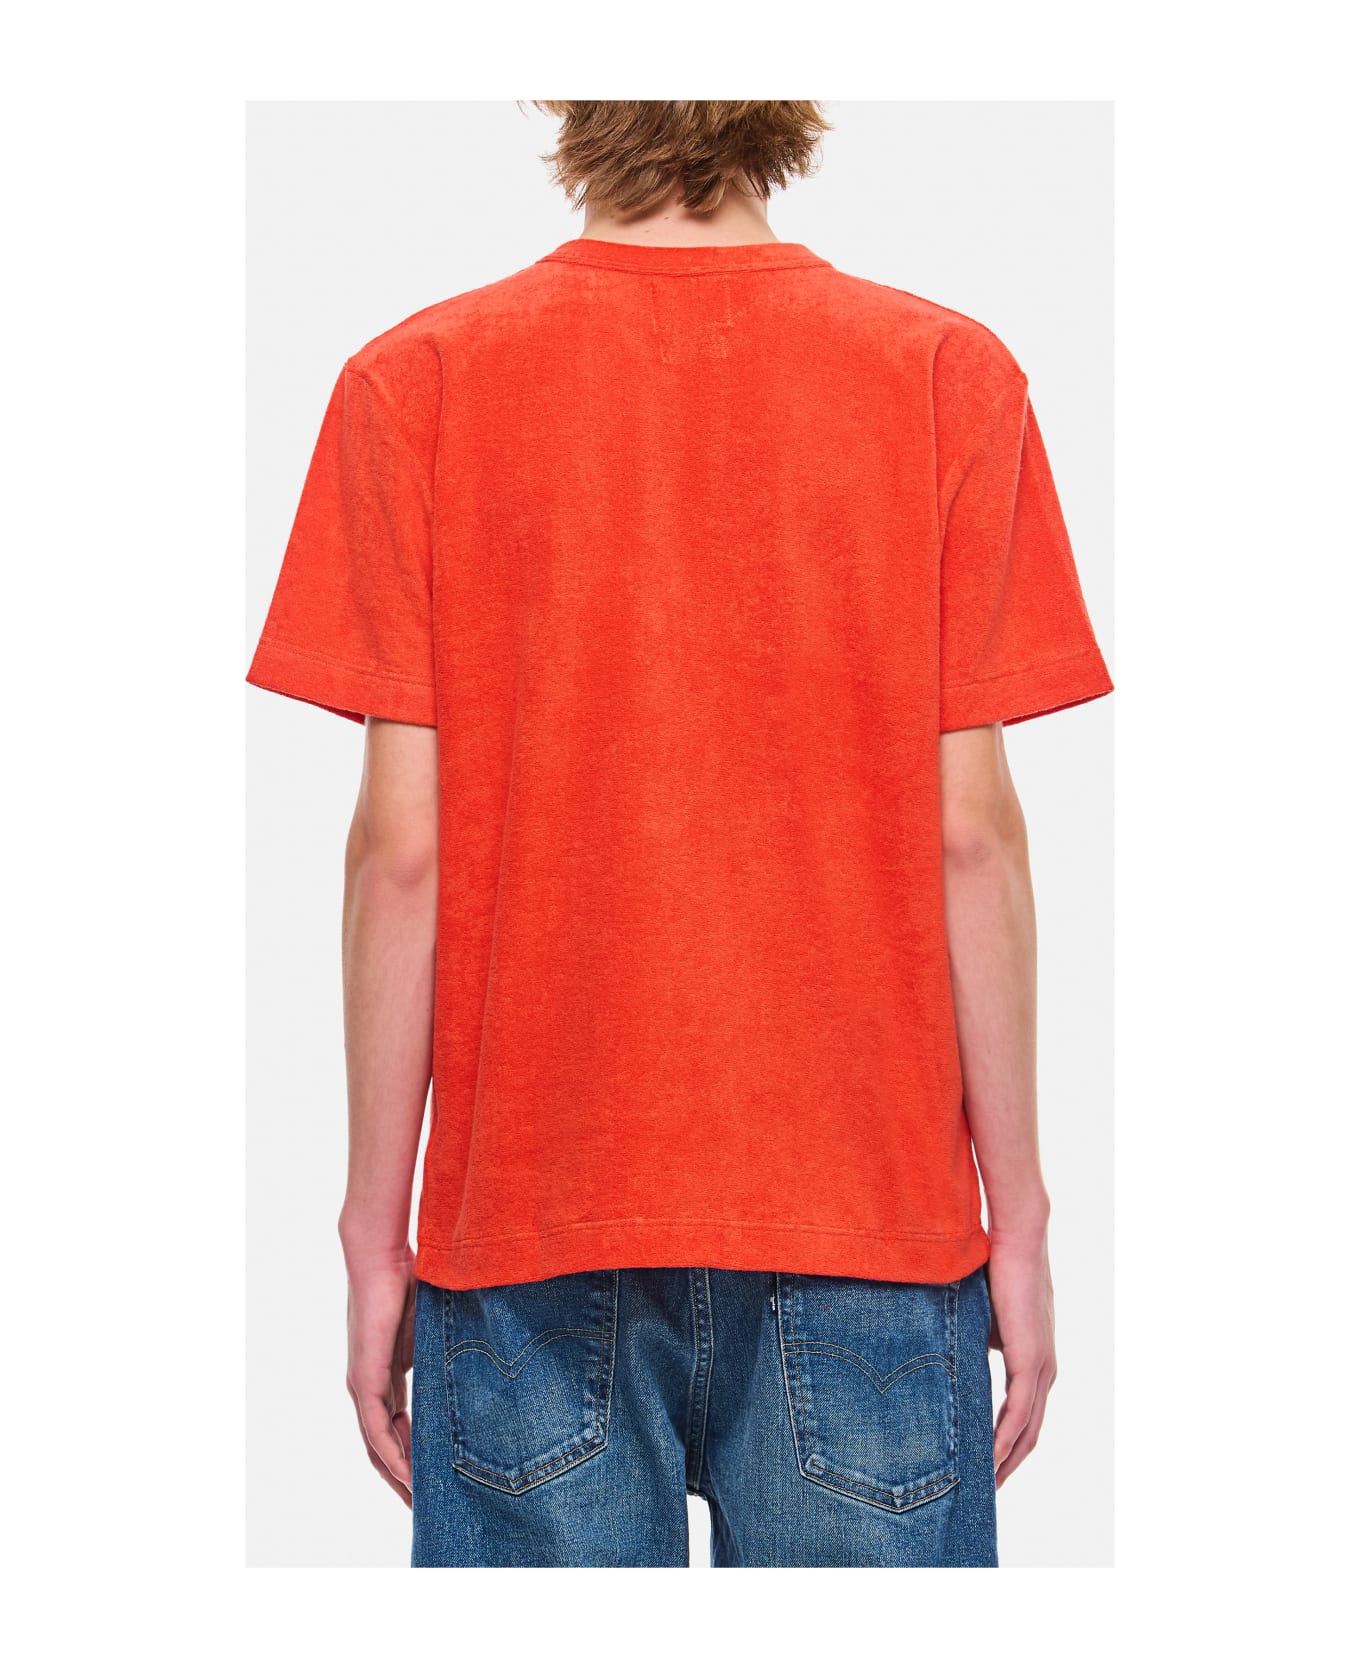 Howlin Shortsleeve Terry T-shirt - Red シャツ